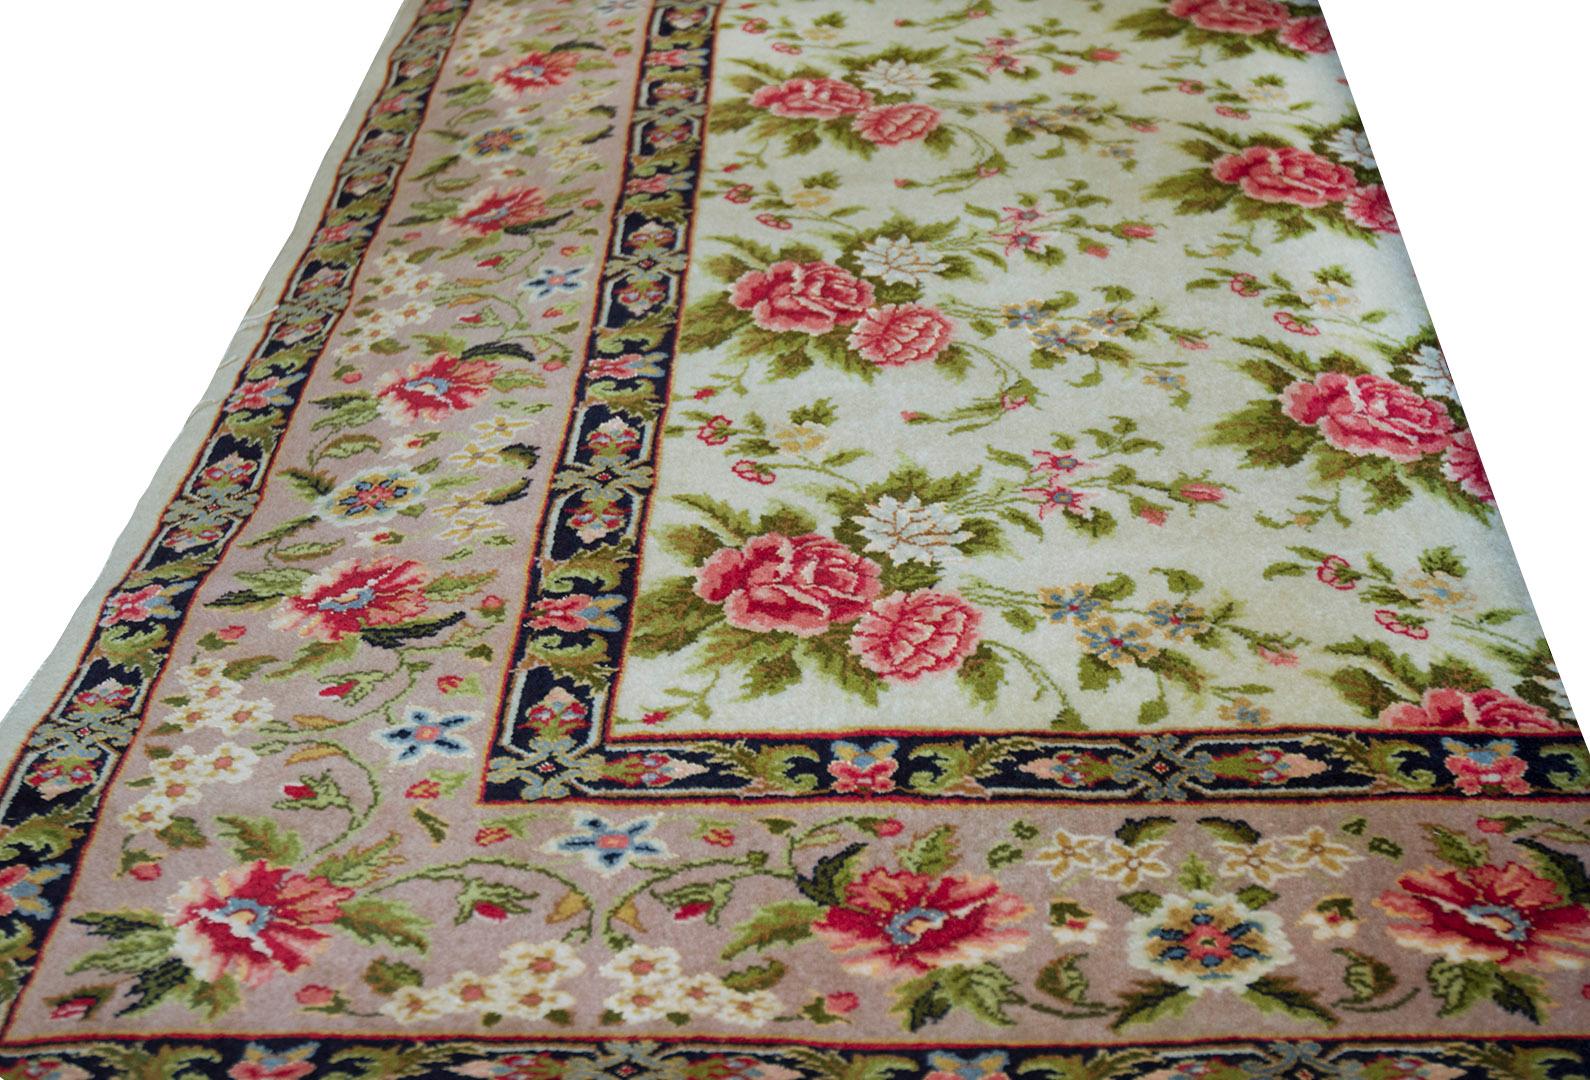 Handwoven by master weavers in Northeast Iran this masterpiece features an amazing coloration and a beautiful design. 100% natural Persian wool. Brand new.